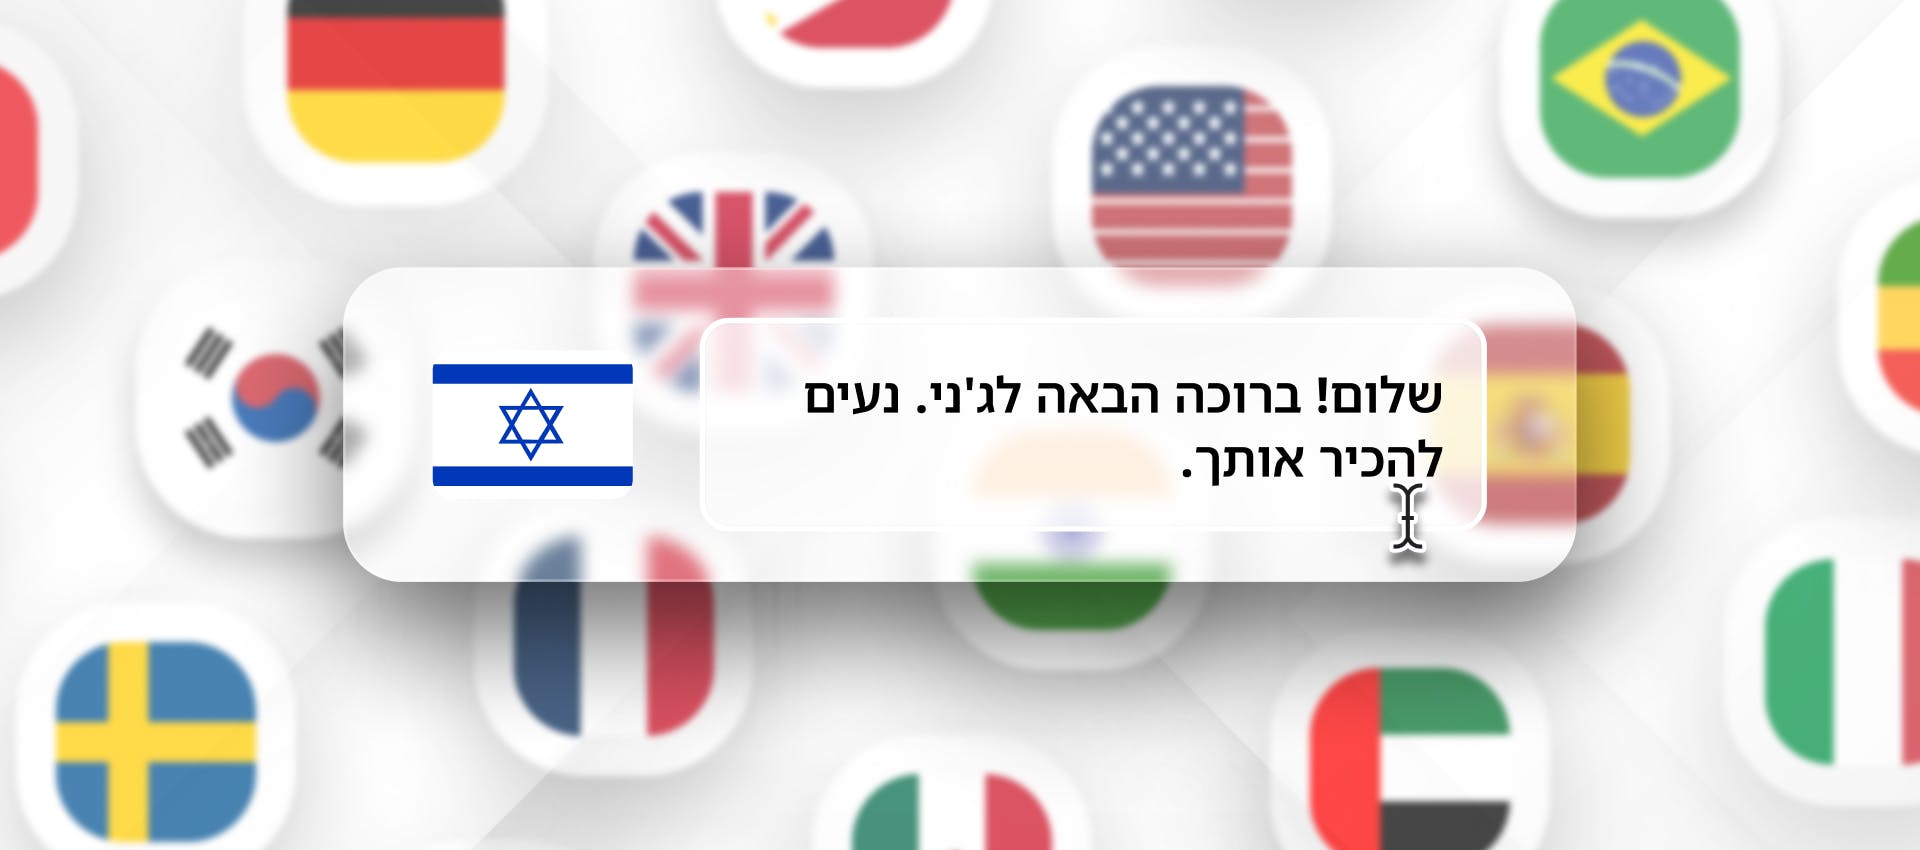 Hebrew phrase for TTS generation with different flags in the background